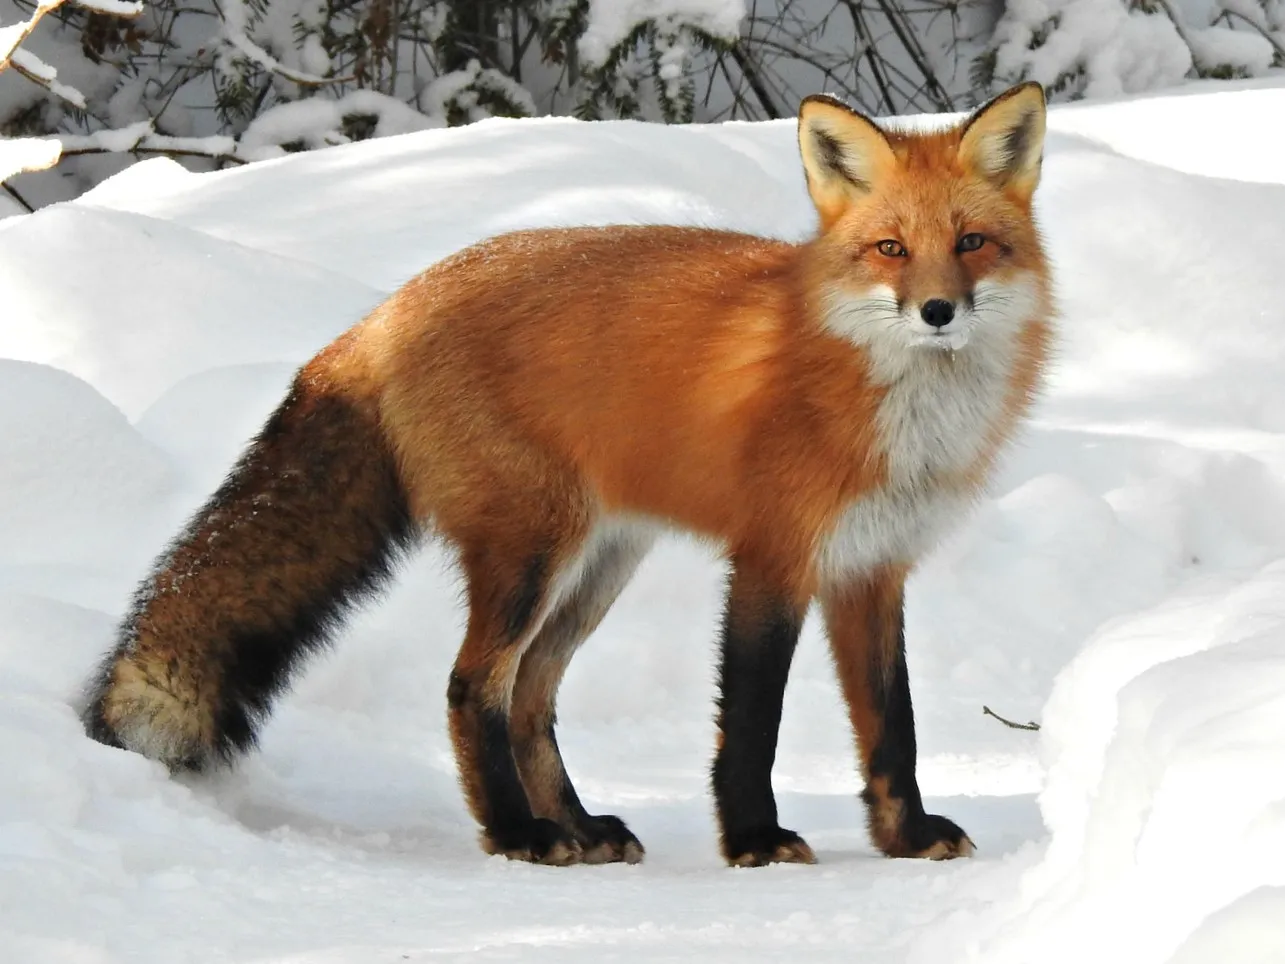 Long Pointy Snouts Protect Snow-Diving Foxes From Injury